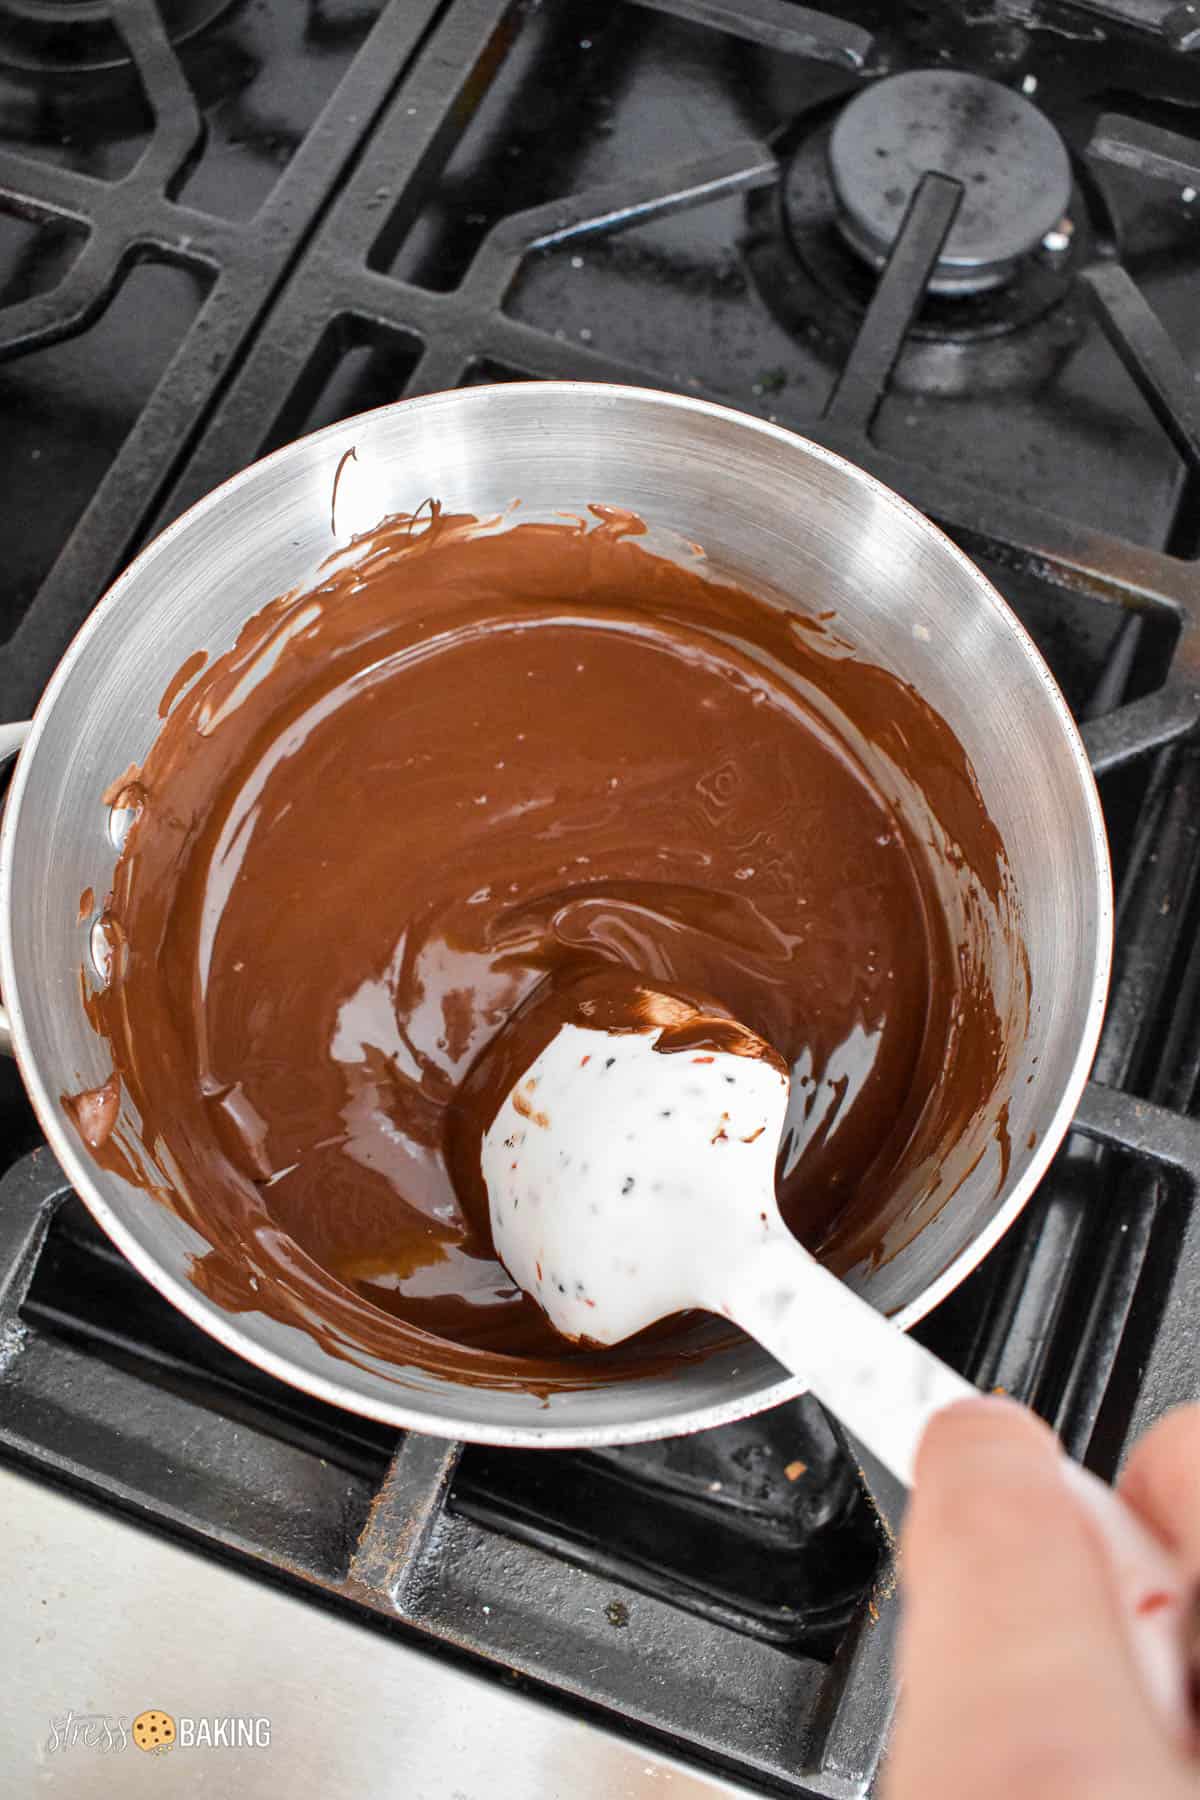 Melted chocolate being stirred with a spatula in a saucepan